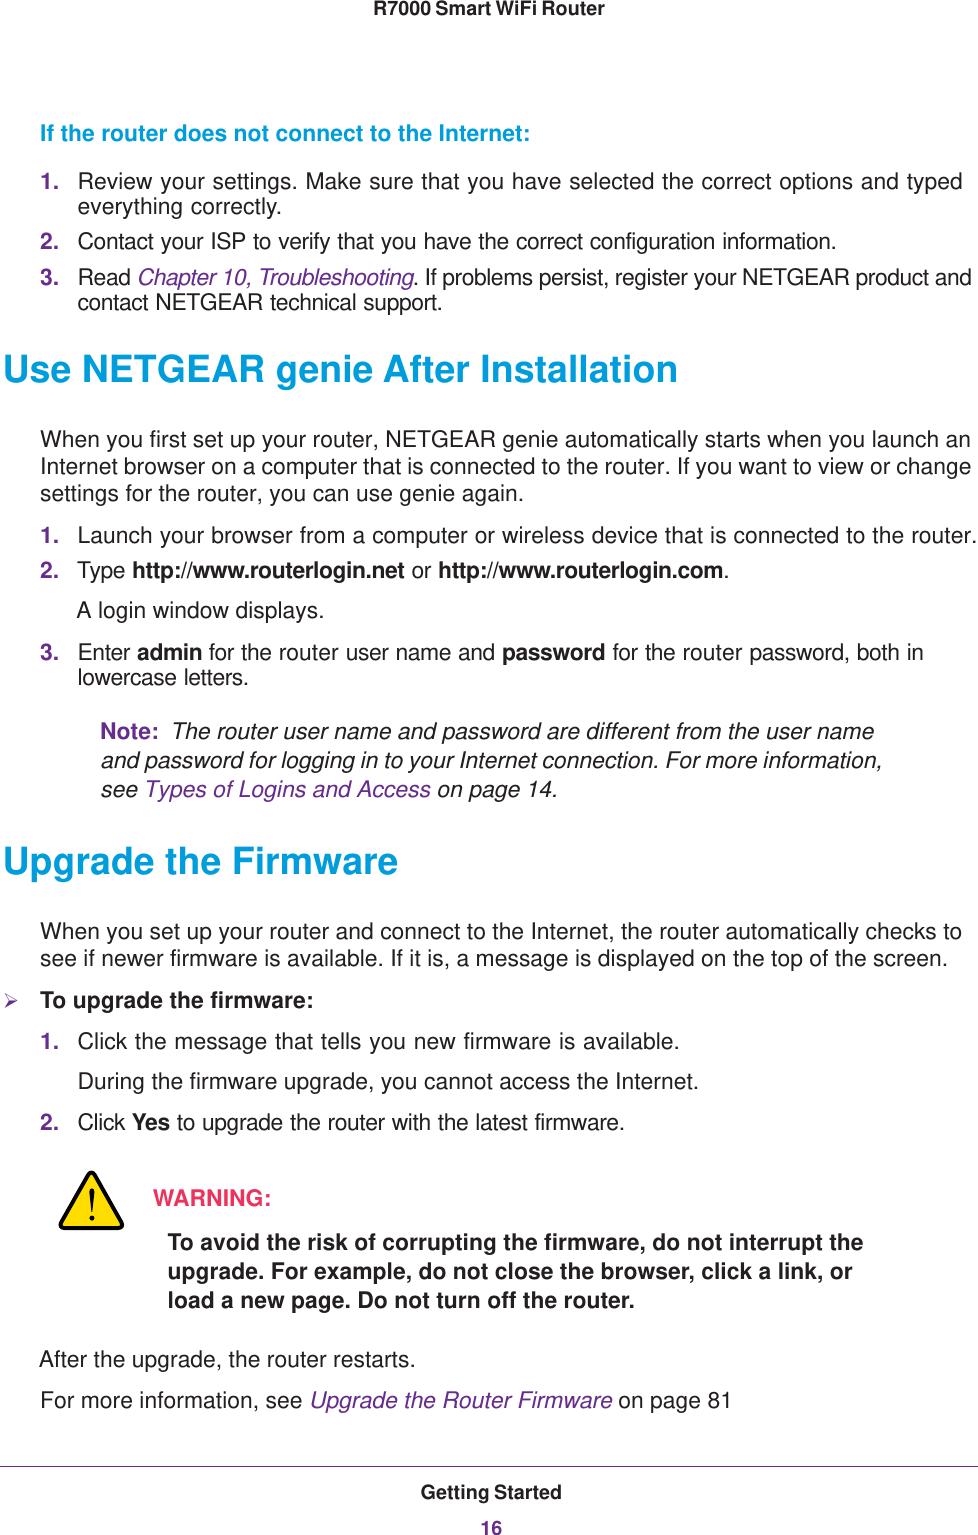 Getting Started16R7000 Smart WiFi Router If the router does not connect to the Internet:1. Review your settings. Make sure that you have selected the correct options and typed everything correctly. 2. Contact your ISP to verify that you have the correct configuration information.3. Read Chapter 10, Troubleshooting. If problems persist, register your NETGEAR product and contact NETGEAR technical support.Use NETGEAR genie After InstallationWhen you first set up your router, NETGEAR genie automatically starts when you launch an Internet browser on a computer that is connected to the router. If you want to view or change settings for the router, you can use genie again.1. Launch your browser from a computer or wireless device that is connected to the router.2. Type http://www.routerlogin.net or http://www.routerlogin.com.A login window displays.3. Enter admin for the router user name and password for the router password, both in lowercase letters. Note:  The router user name and password are different from the user name and password for logging in to your Internet connection. For more information, see Types of Logins and Access on page  14.Upgrade the FirmwareWhen you set up your router and connect to the Internet, the router automatically checks to see if newer firmware is available. If it is, a message is displayed on the top of the screen. To upgrade the firmware:1. Click the message that tells you new firmware is available.During the firmware upgrade, you cannot access the Internet.2. Click Yes to upgrade the router with the latest firmware. WARNING:To avoid the risk of corrupting the firmware, do not interrupt the upgrade. For example, do not close the browser, click a link, or load a new page. Do not turn off the router.After the upgrade, the router restarts.For more information, see Upgrade the Router Firmware on page  81